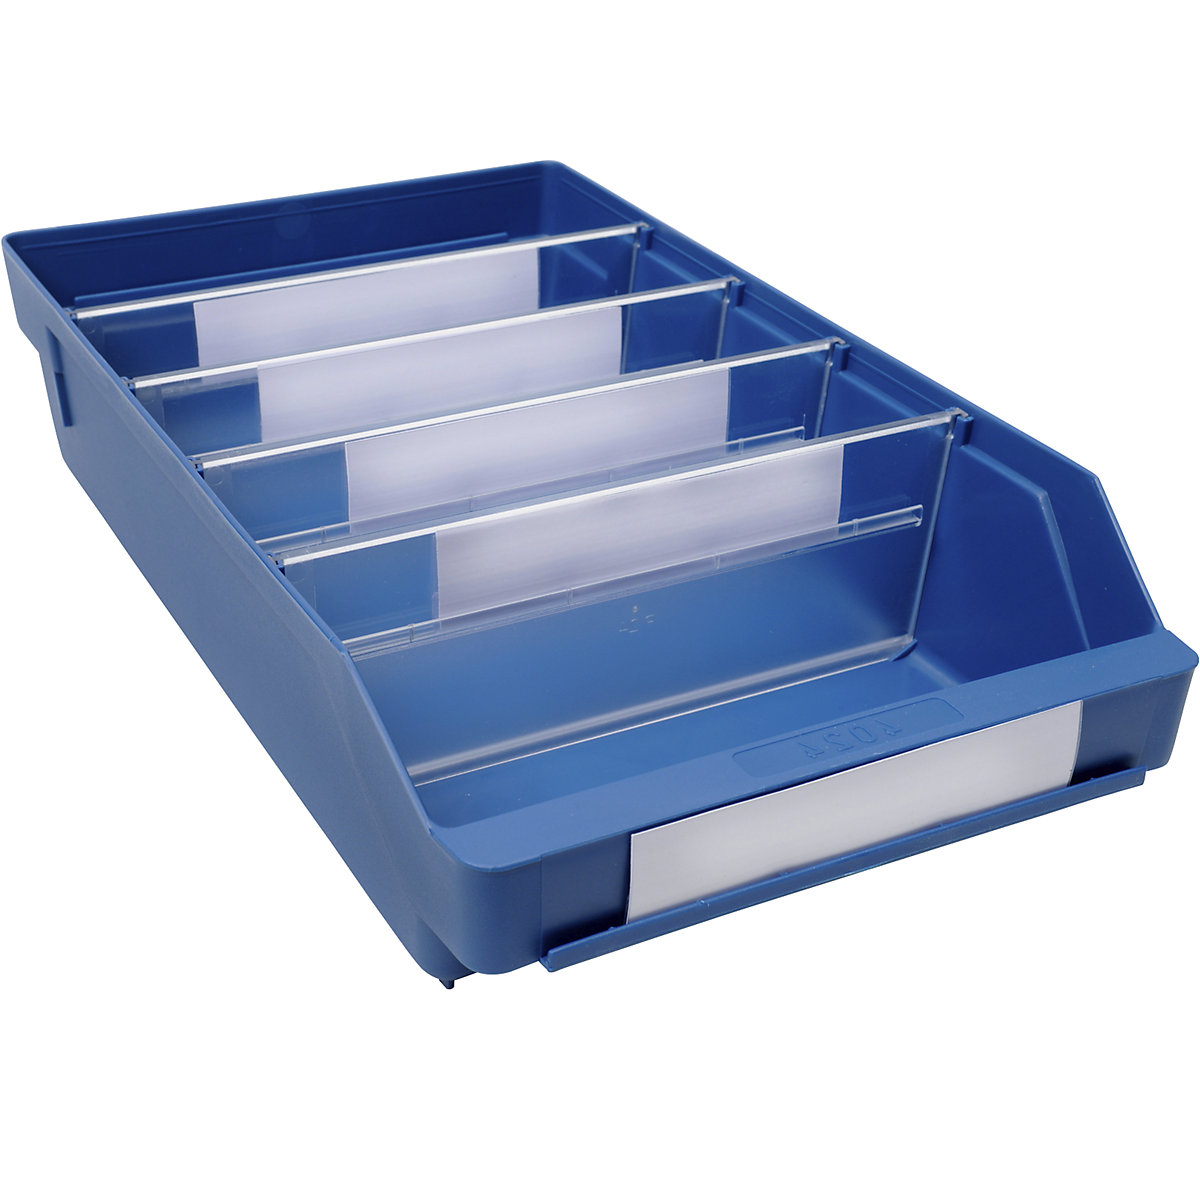 Shelf bin made of highly impact resistant polypropylene – STEMO, blue, LxWxH 400 x 240 x 95 mm, pack of 15-4